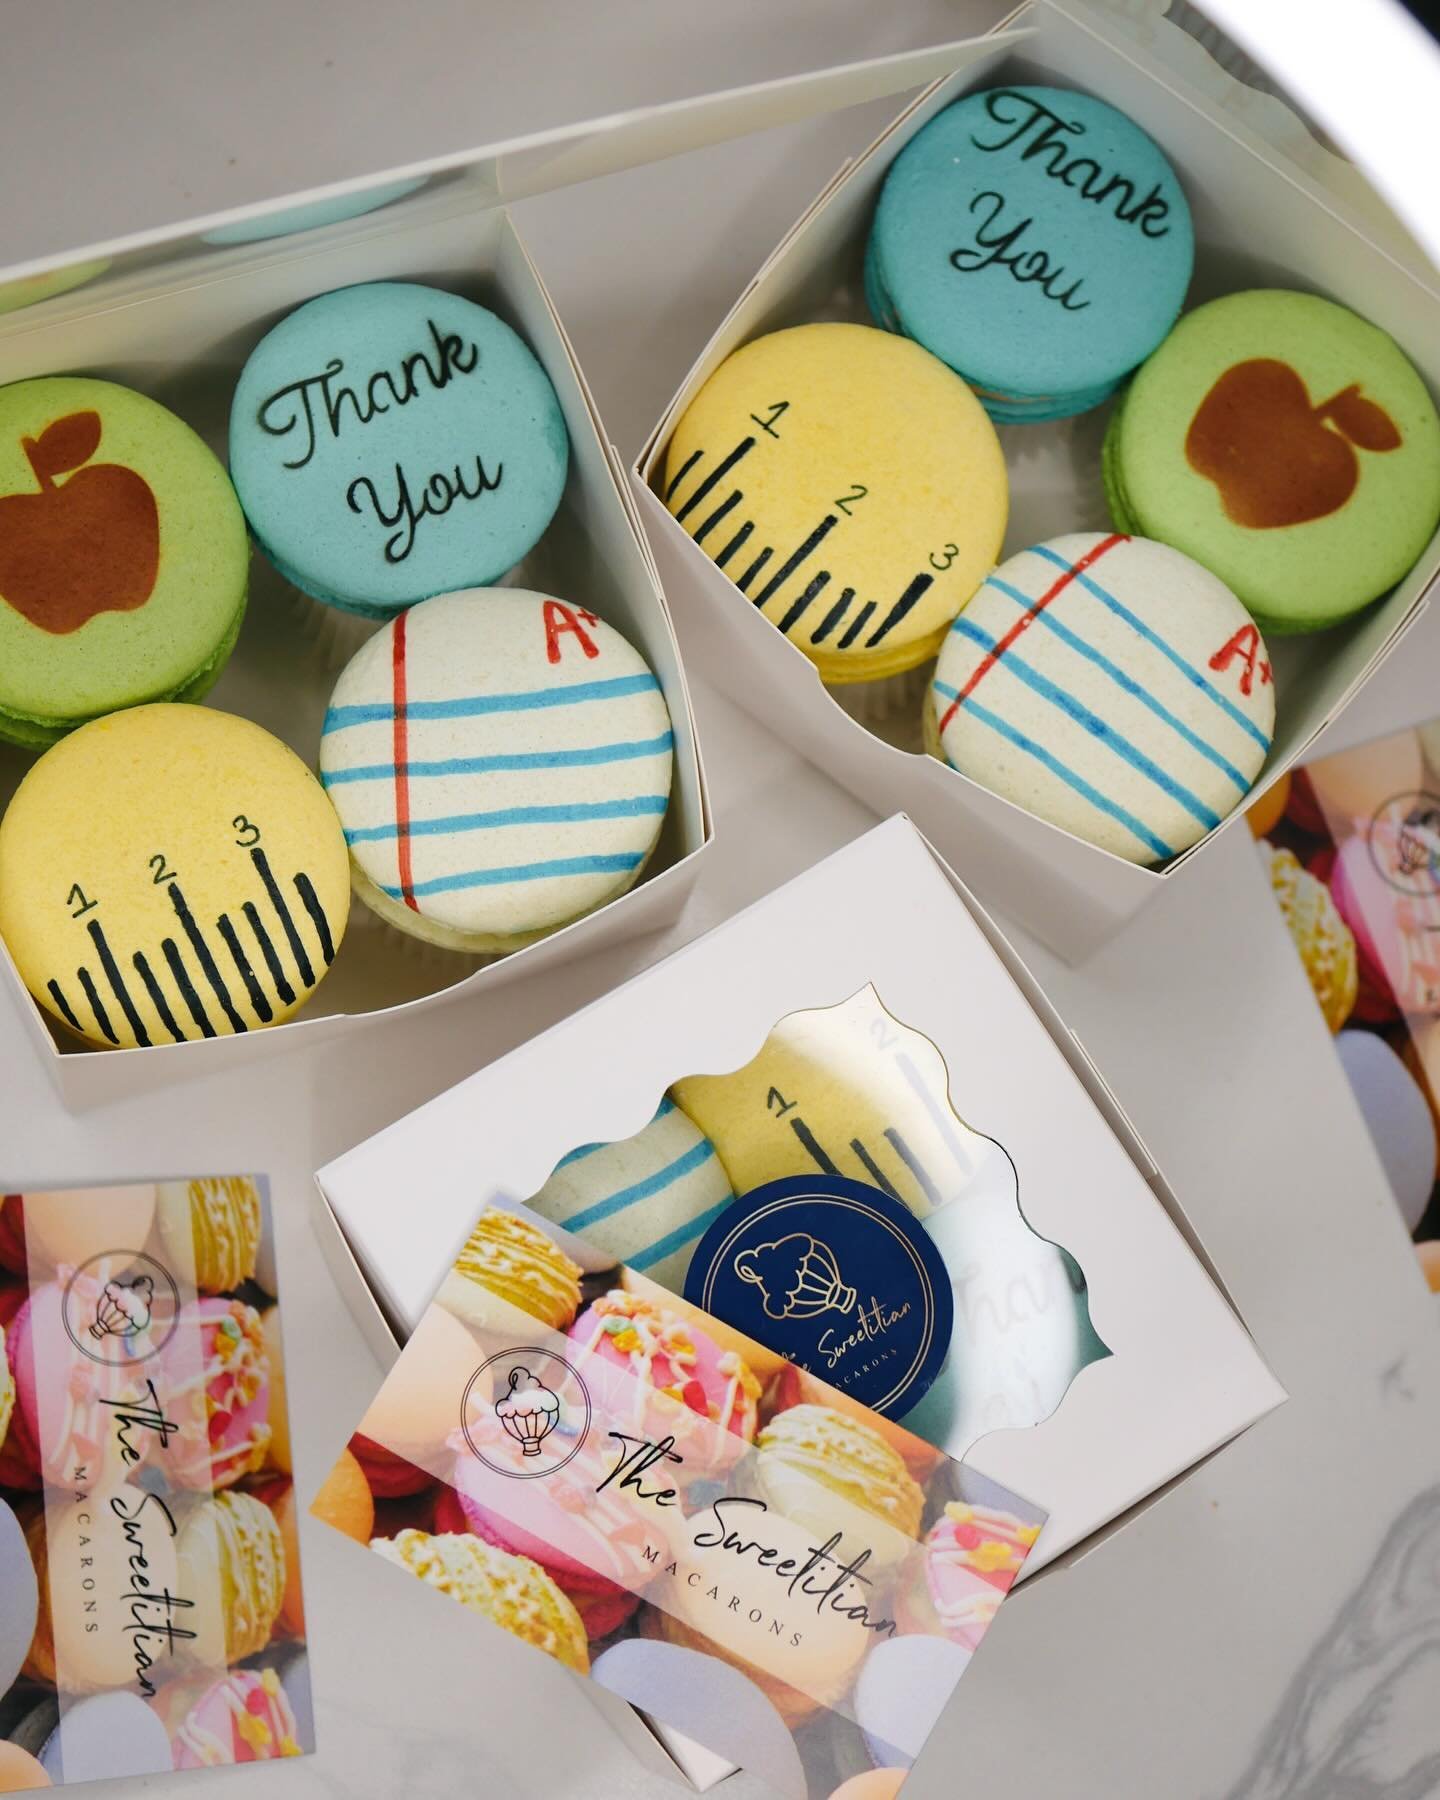 Indulging in these sweet treats to show our appreciation for all the hard work our teachers do during Teacher Appreciation Week! 🍬📚 #TeacherAppreciationWeek #SweetTreats #Grateful #macaron #frenchmacarons #happy #bakery #cottagefoodbaker #sweets